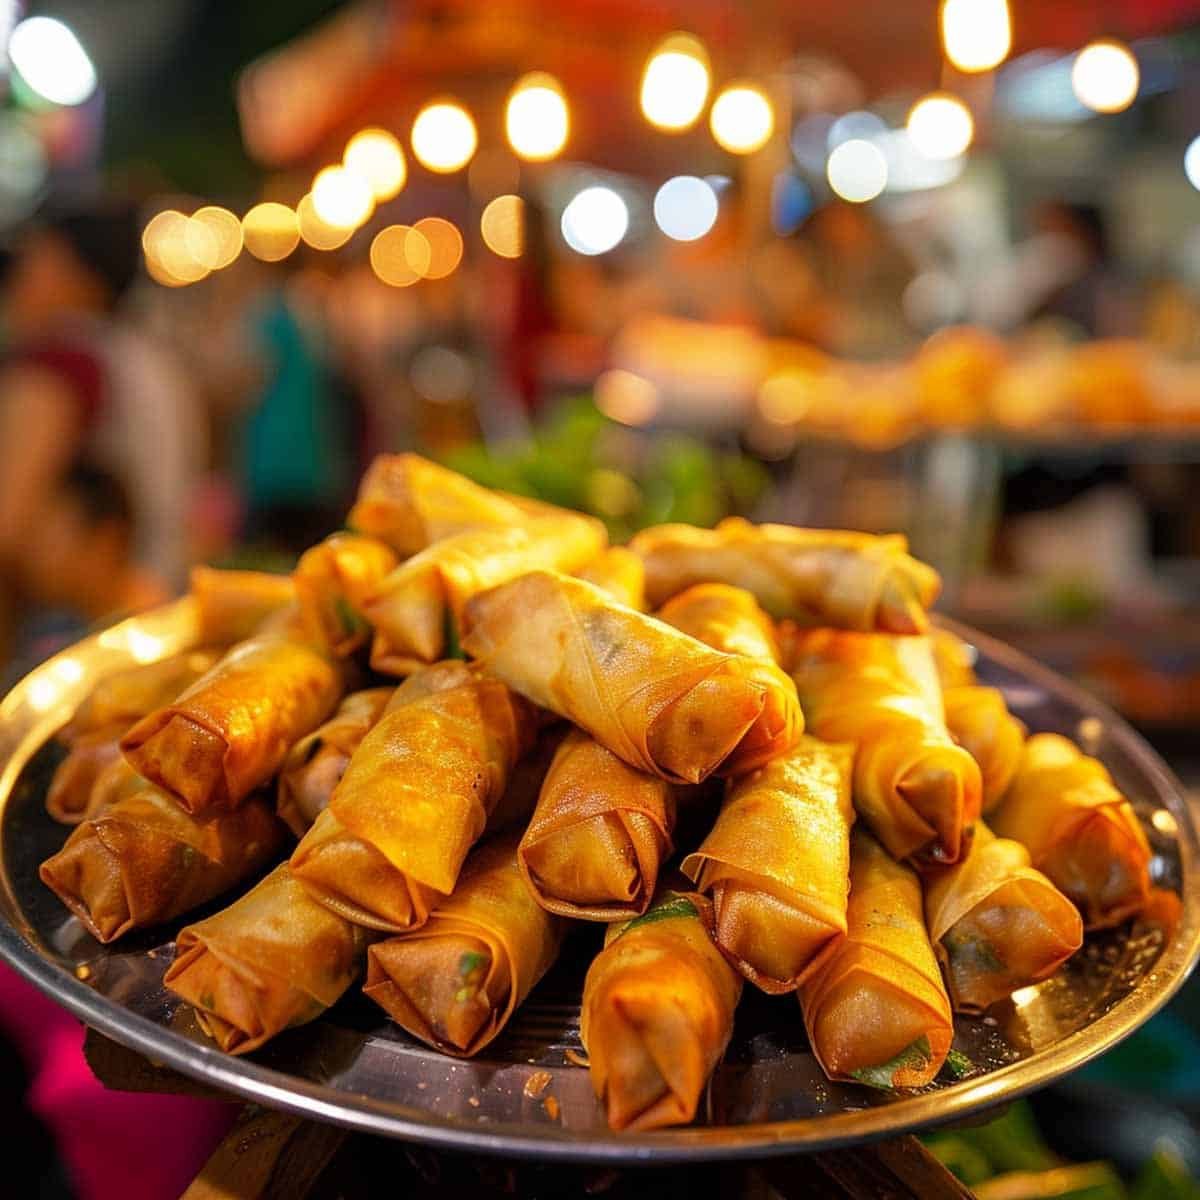 A plate of golden-brown Fried Thai Spring Rolls (Por Pia Tod), filled with a savory mixture of vegetables and meat. The rolls are arranged neatly on a  plate,